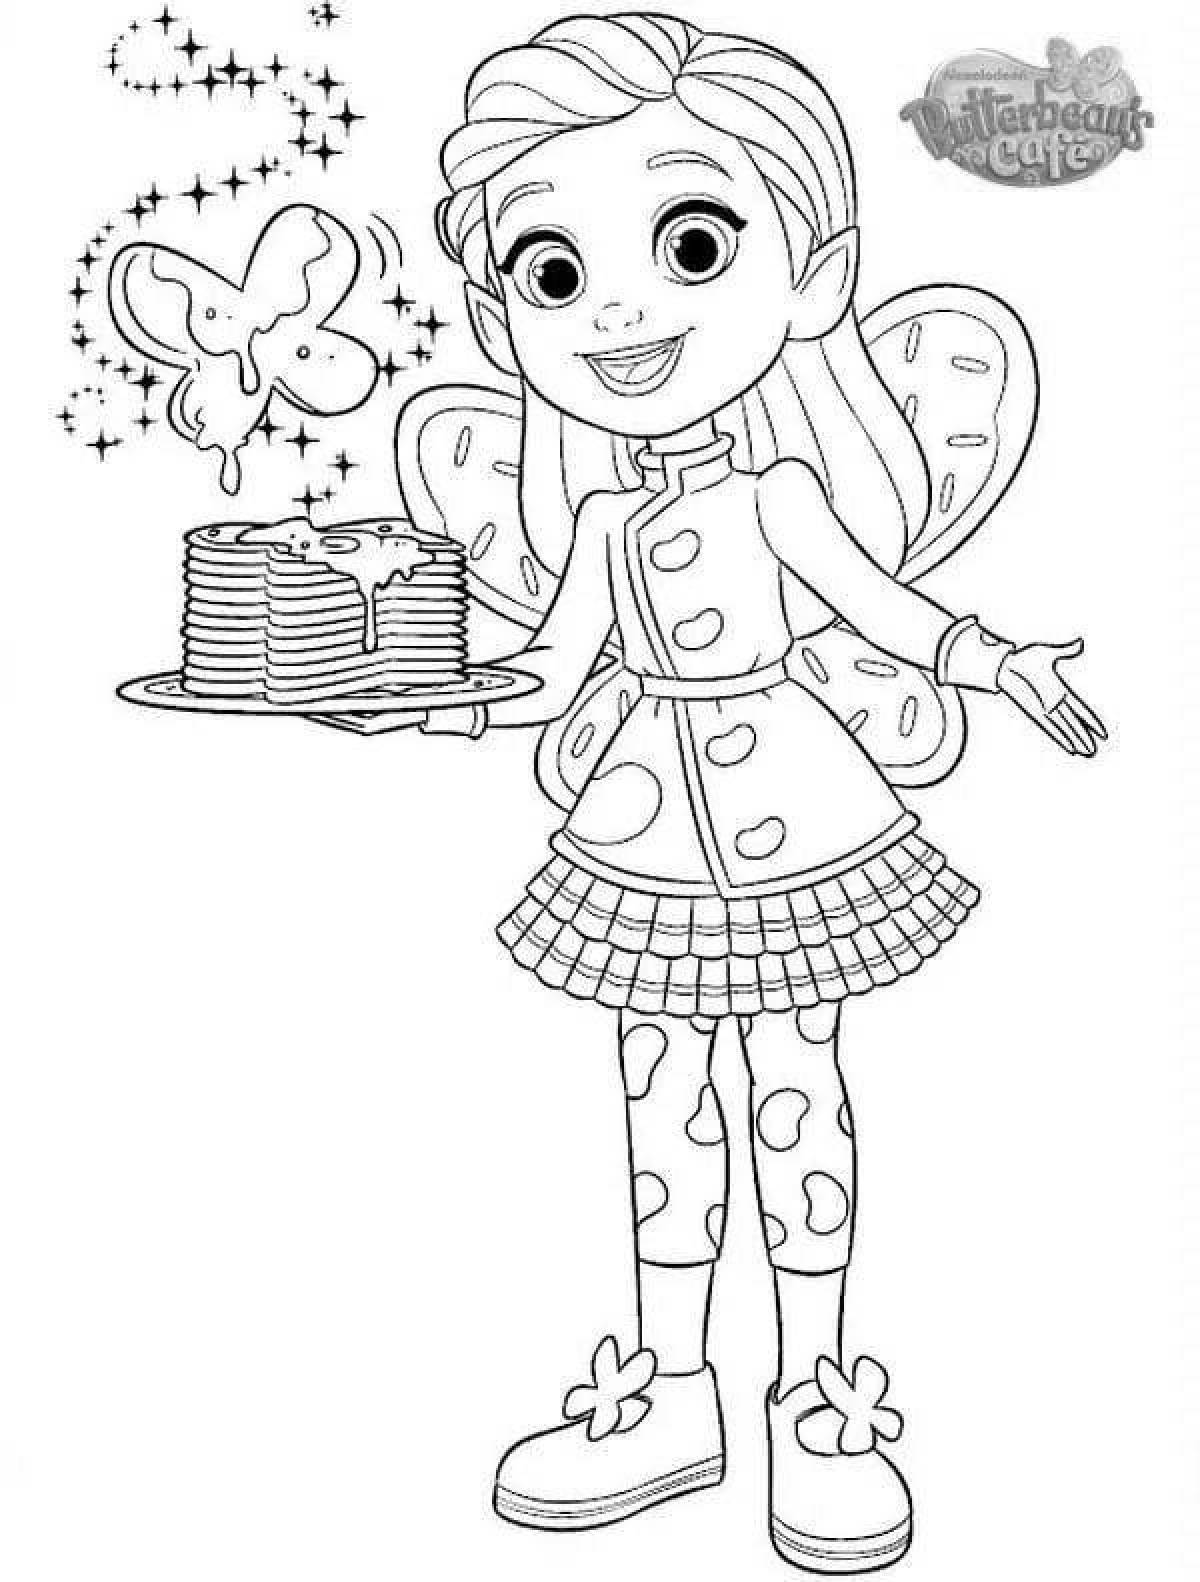 Colorful cafe butterbean coloring page